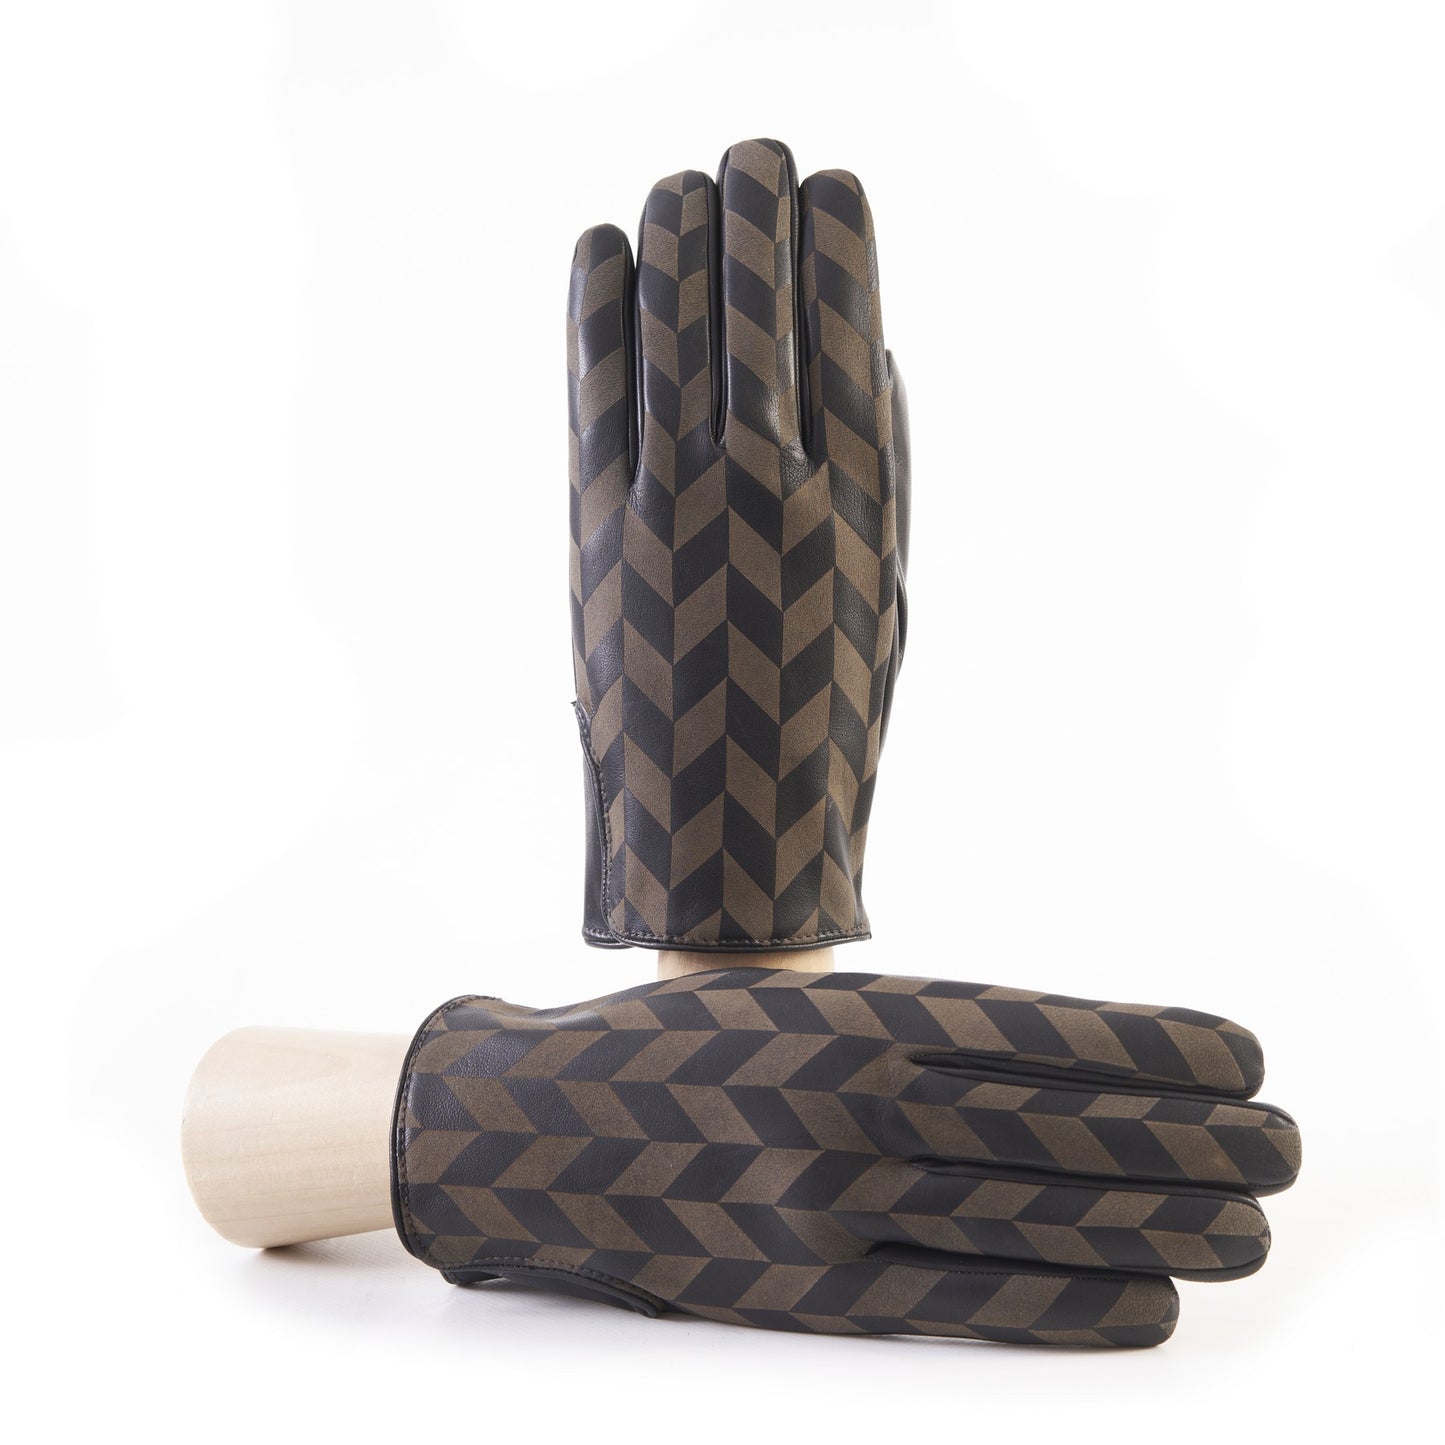 Men's grey nappa leather gloves with laser-worked on the back palm opening and cashmere lining